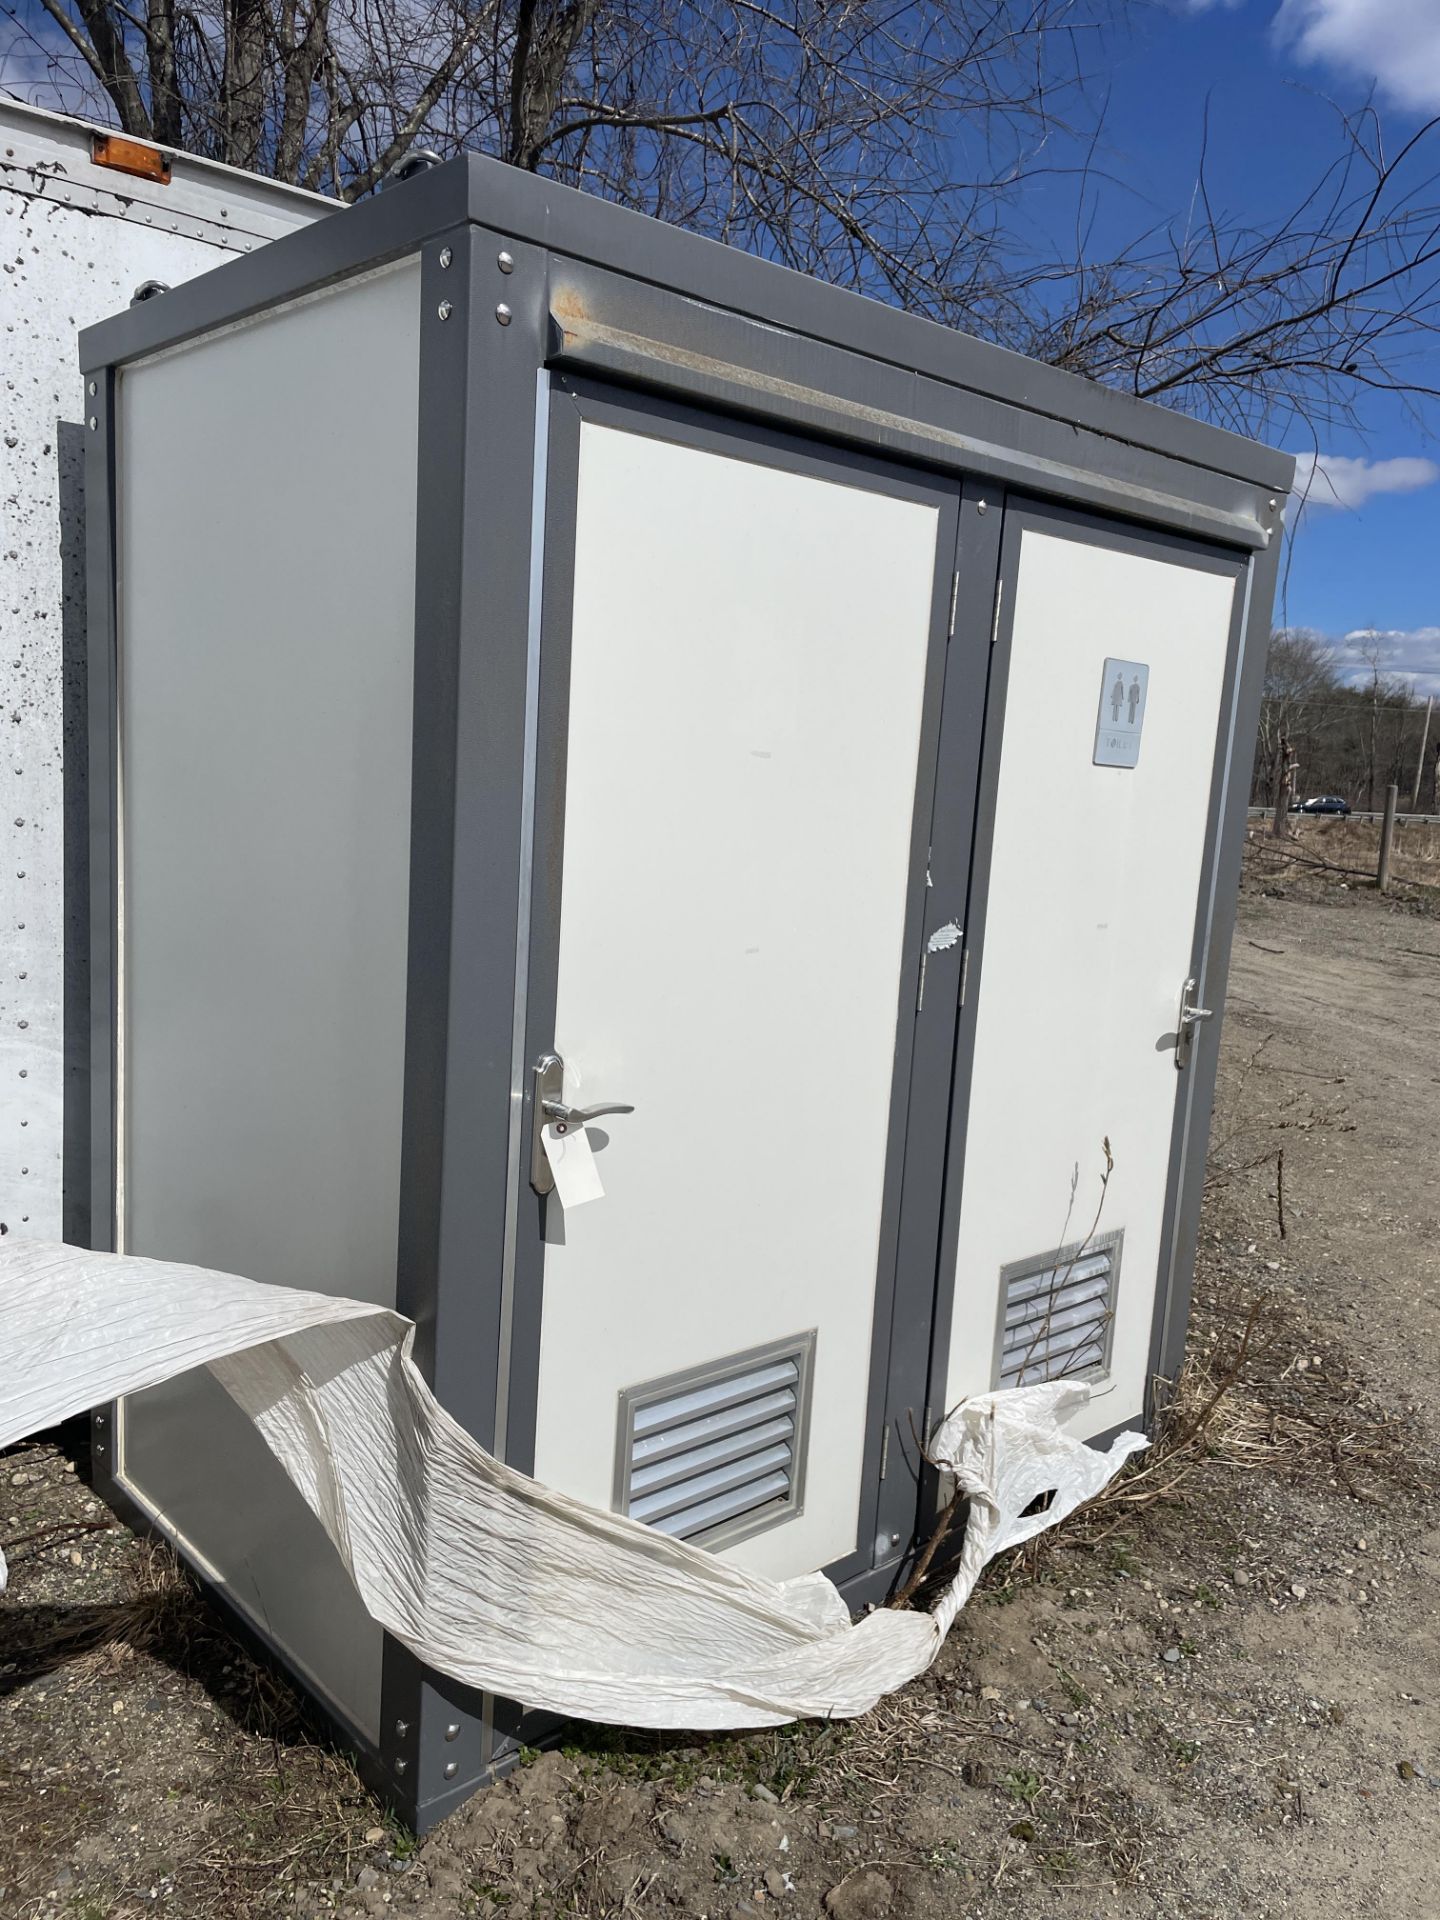 (UNUSED) Portable 2 Stall Restroom w/ Fork Slot and Lifting Hook (Located In Lancaster) - Image 4 of 6